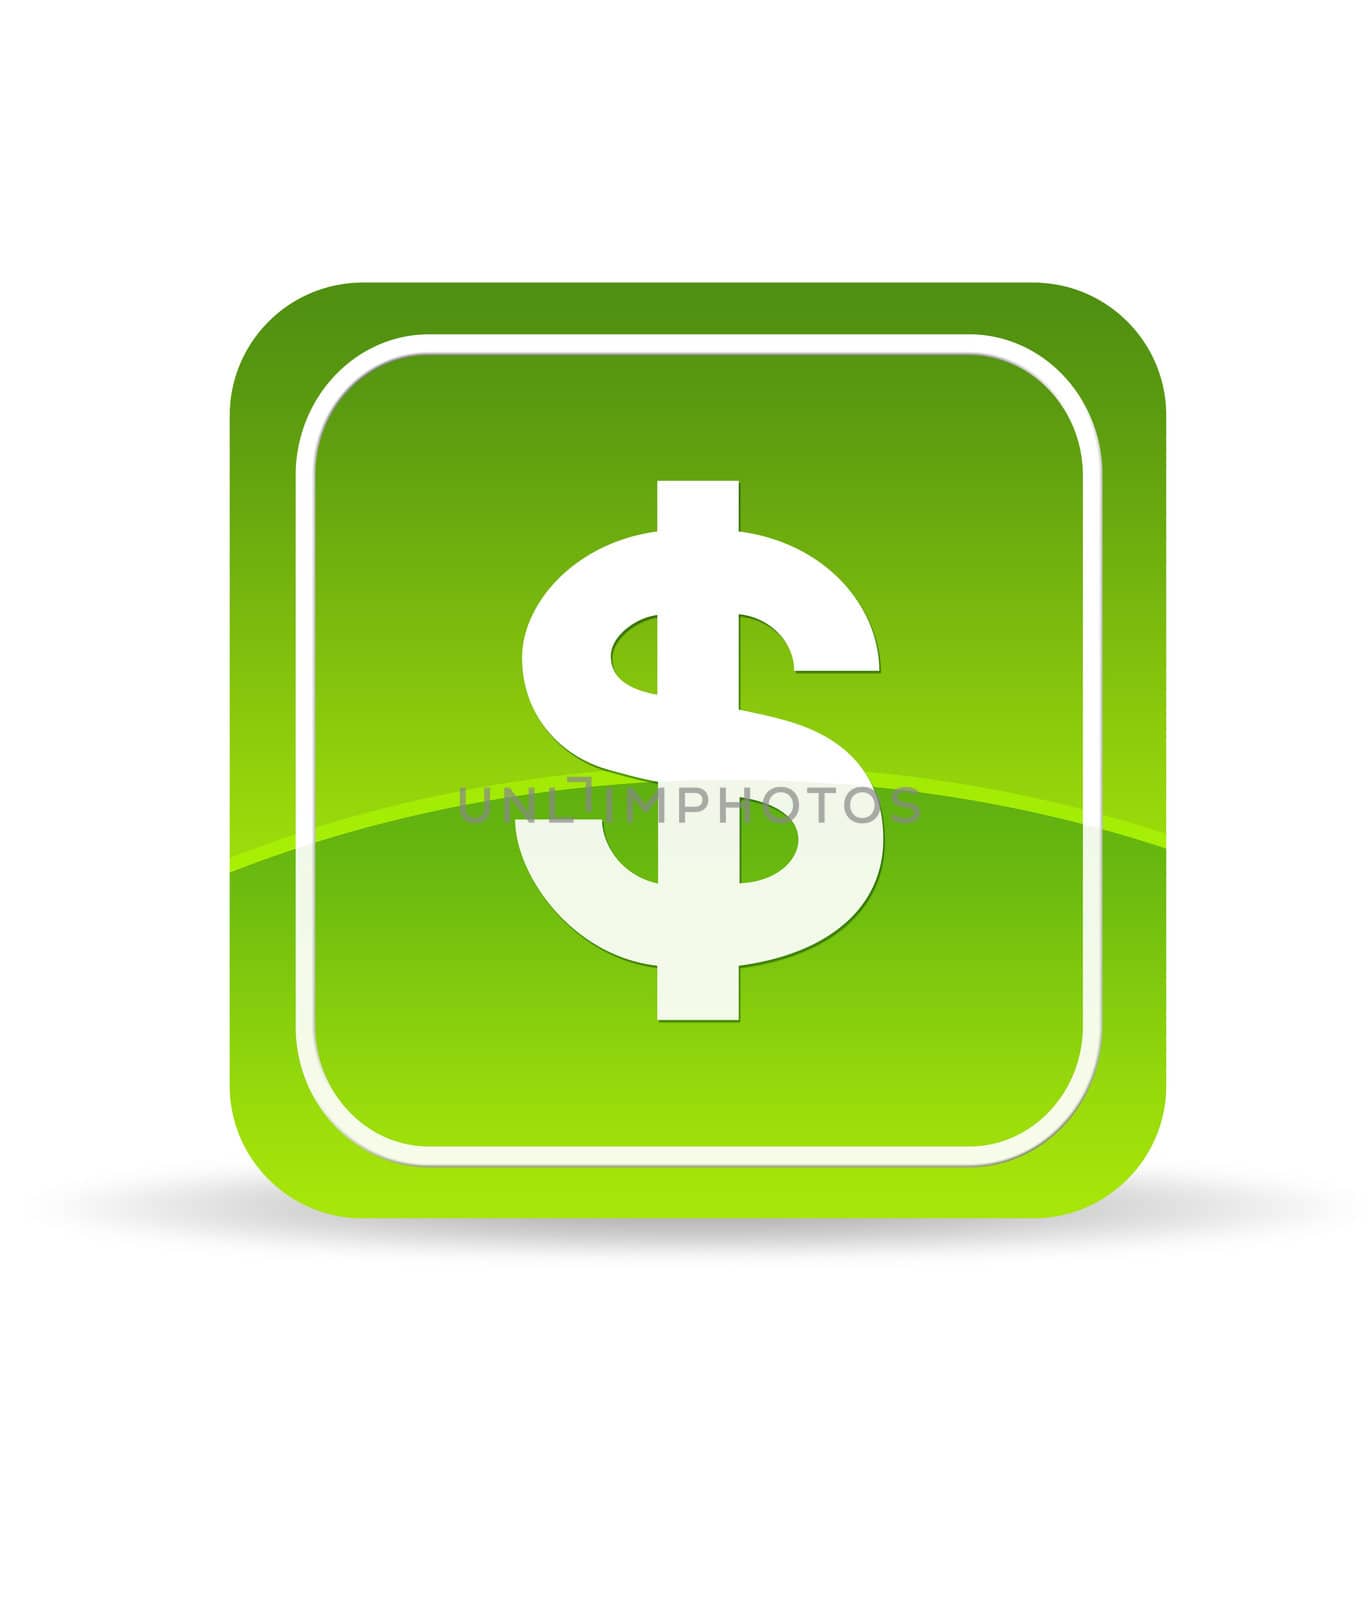 High resolution green dollar icon on white background.